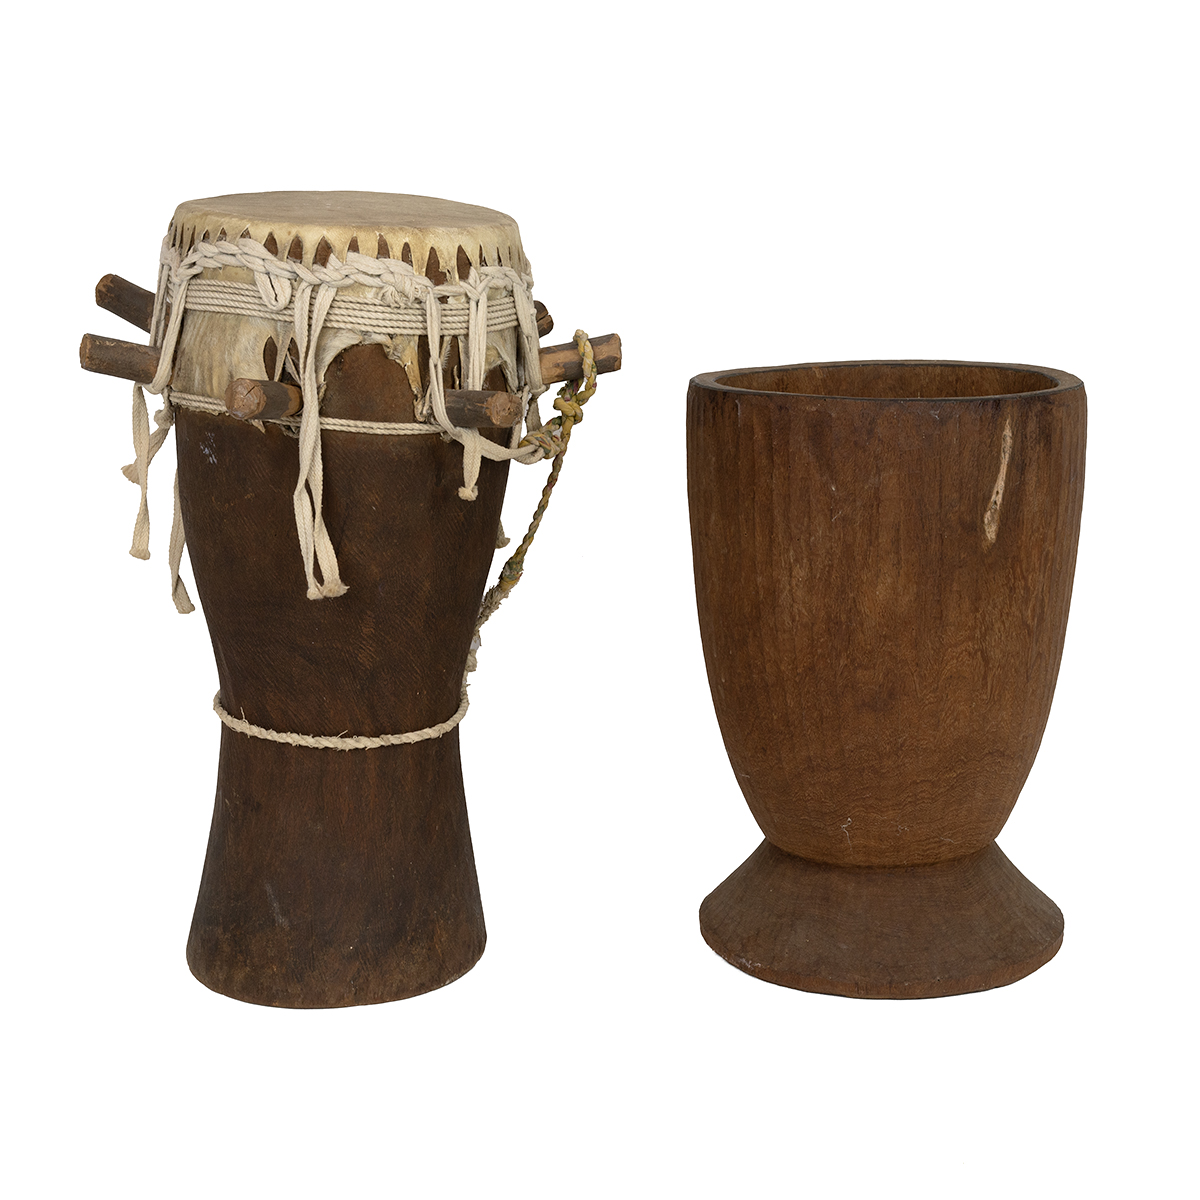 Traditional African hardwood drum (H 52cm) and a hardwood mortar for pound grain or roots (H 41cm...